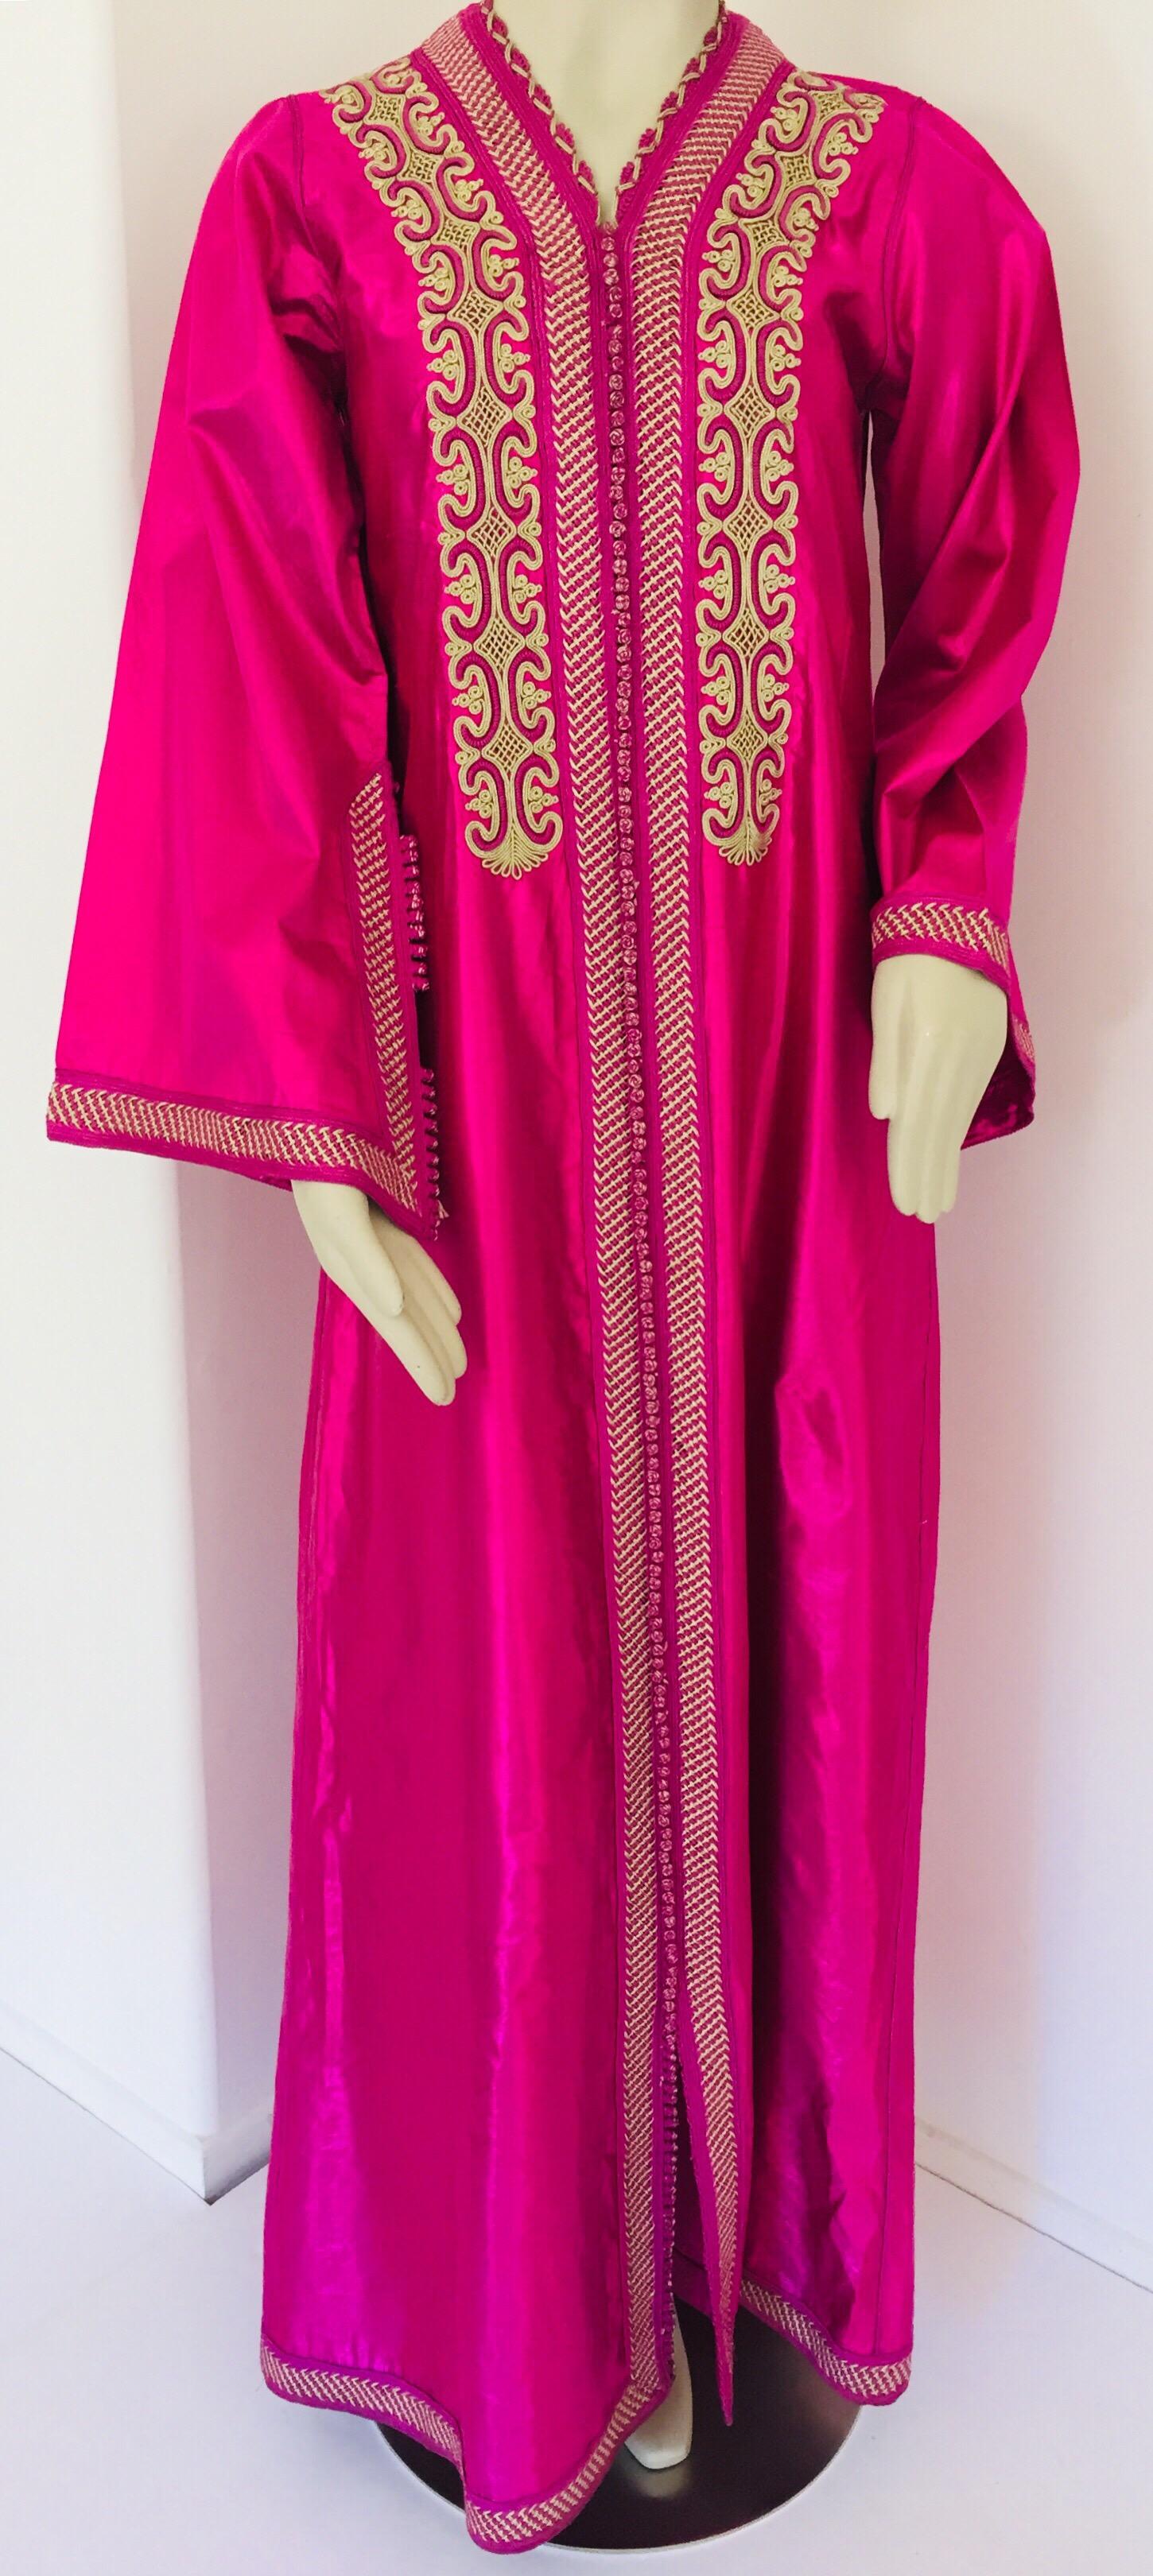 Moroccan caftan, evening or interior adorned with front embroideries.
Handcrafted vintage exotic 1970s kaftan gown.
The luminous pink metallic fabric maxi dress caftan is adorned in front with floral embroidered patterned and trim.
Great chic